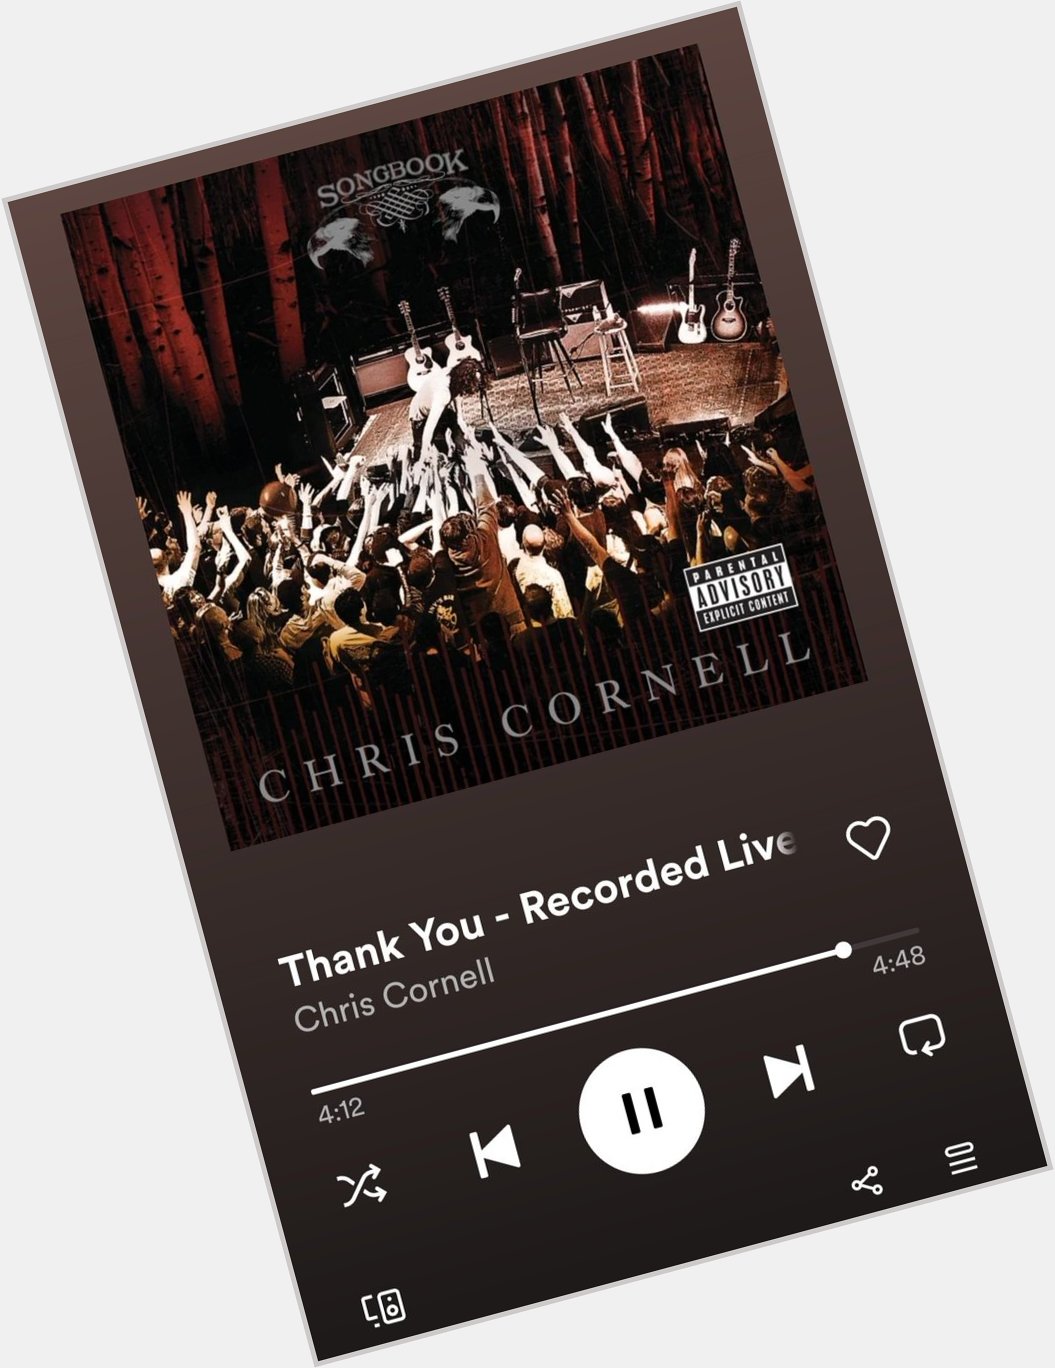 Day 14, song you\d love to be played at your wedding 
Happy birthday to Chris Cornell,  my favorite singer. RIP  